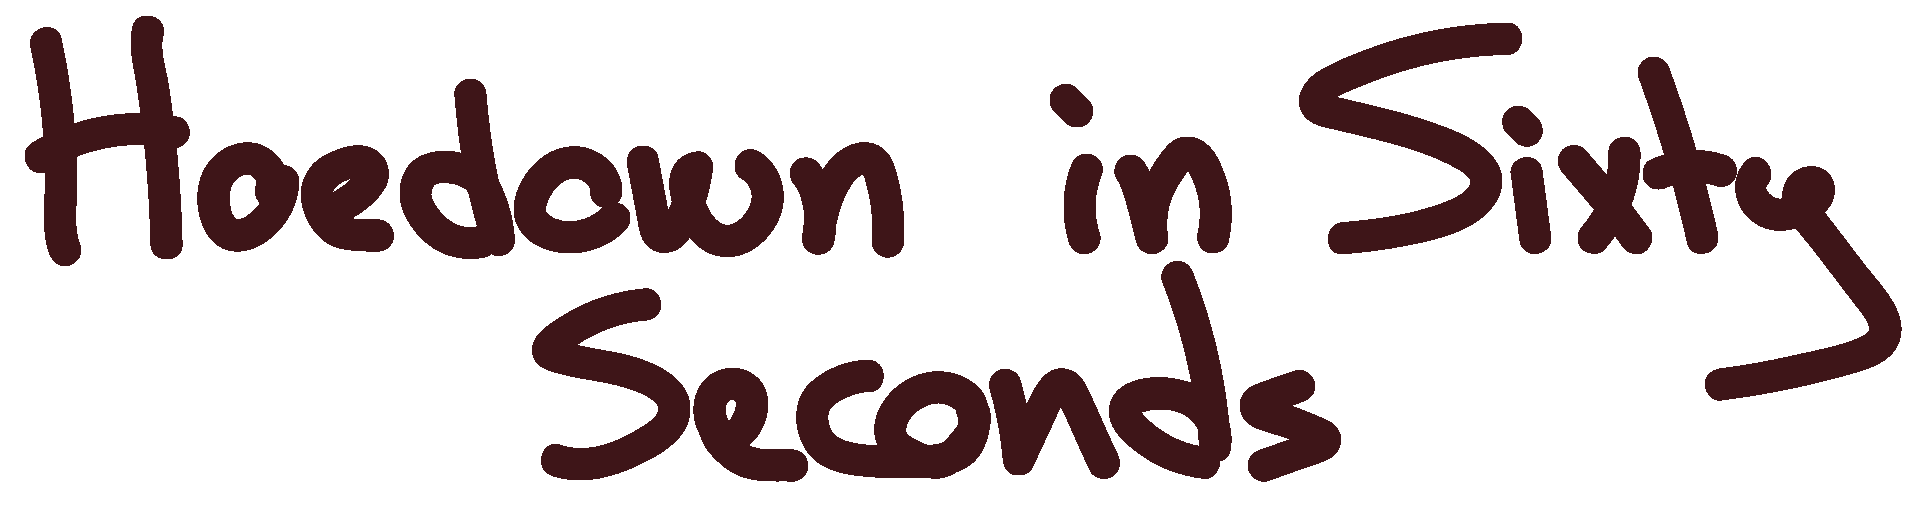 Hoedown in Sixty Seconds - in handwriting